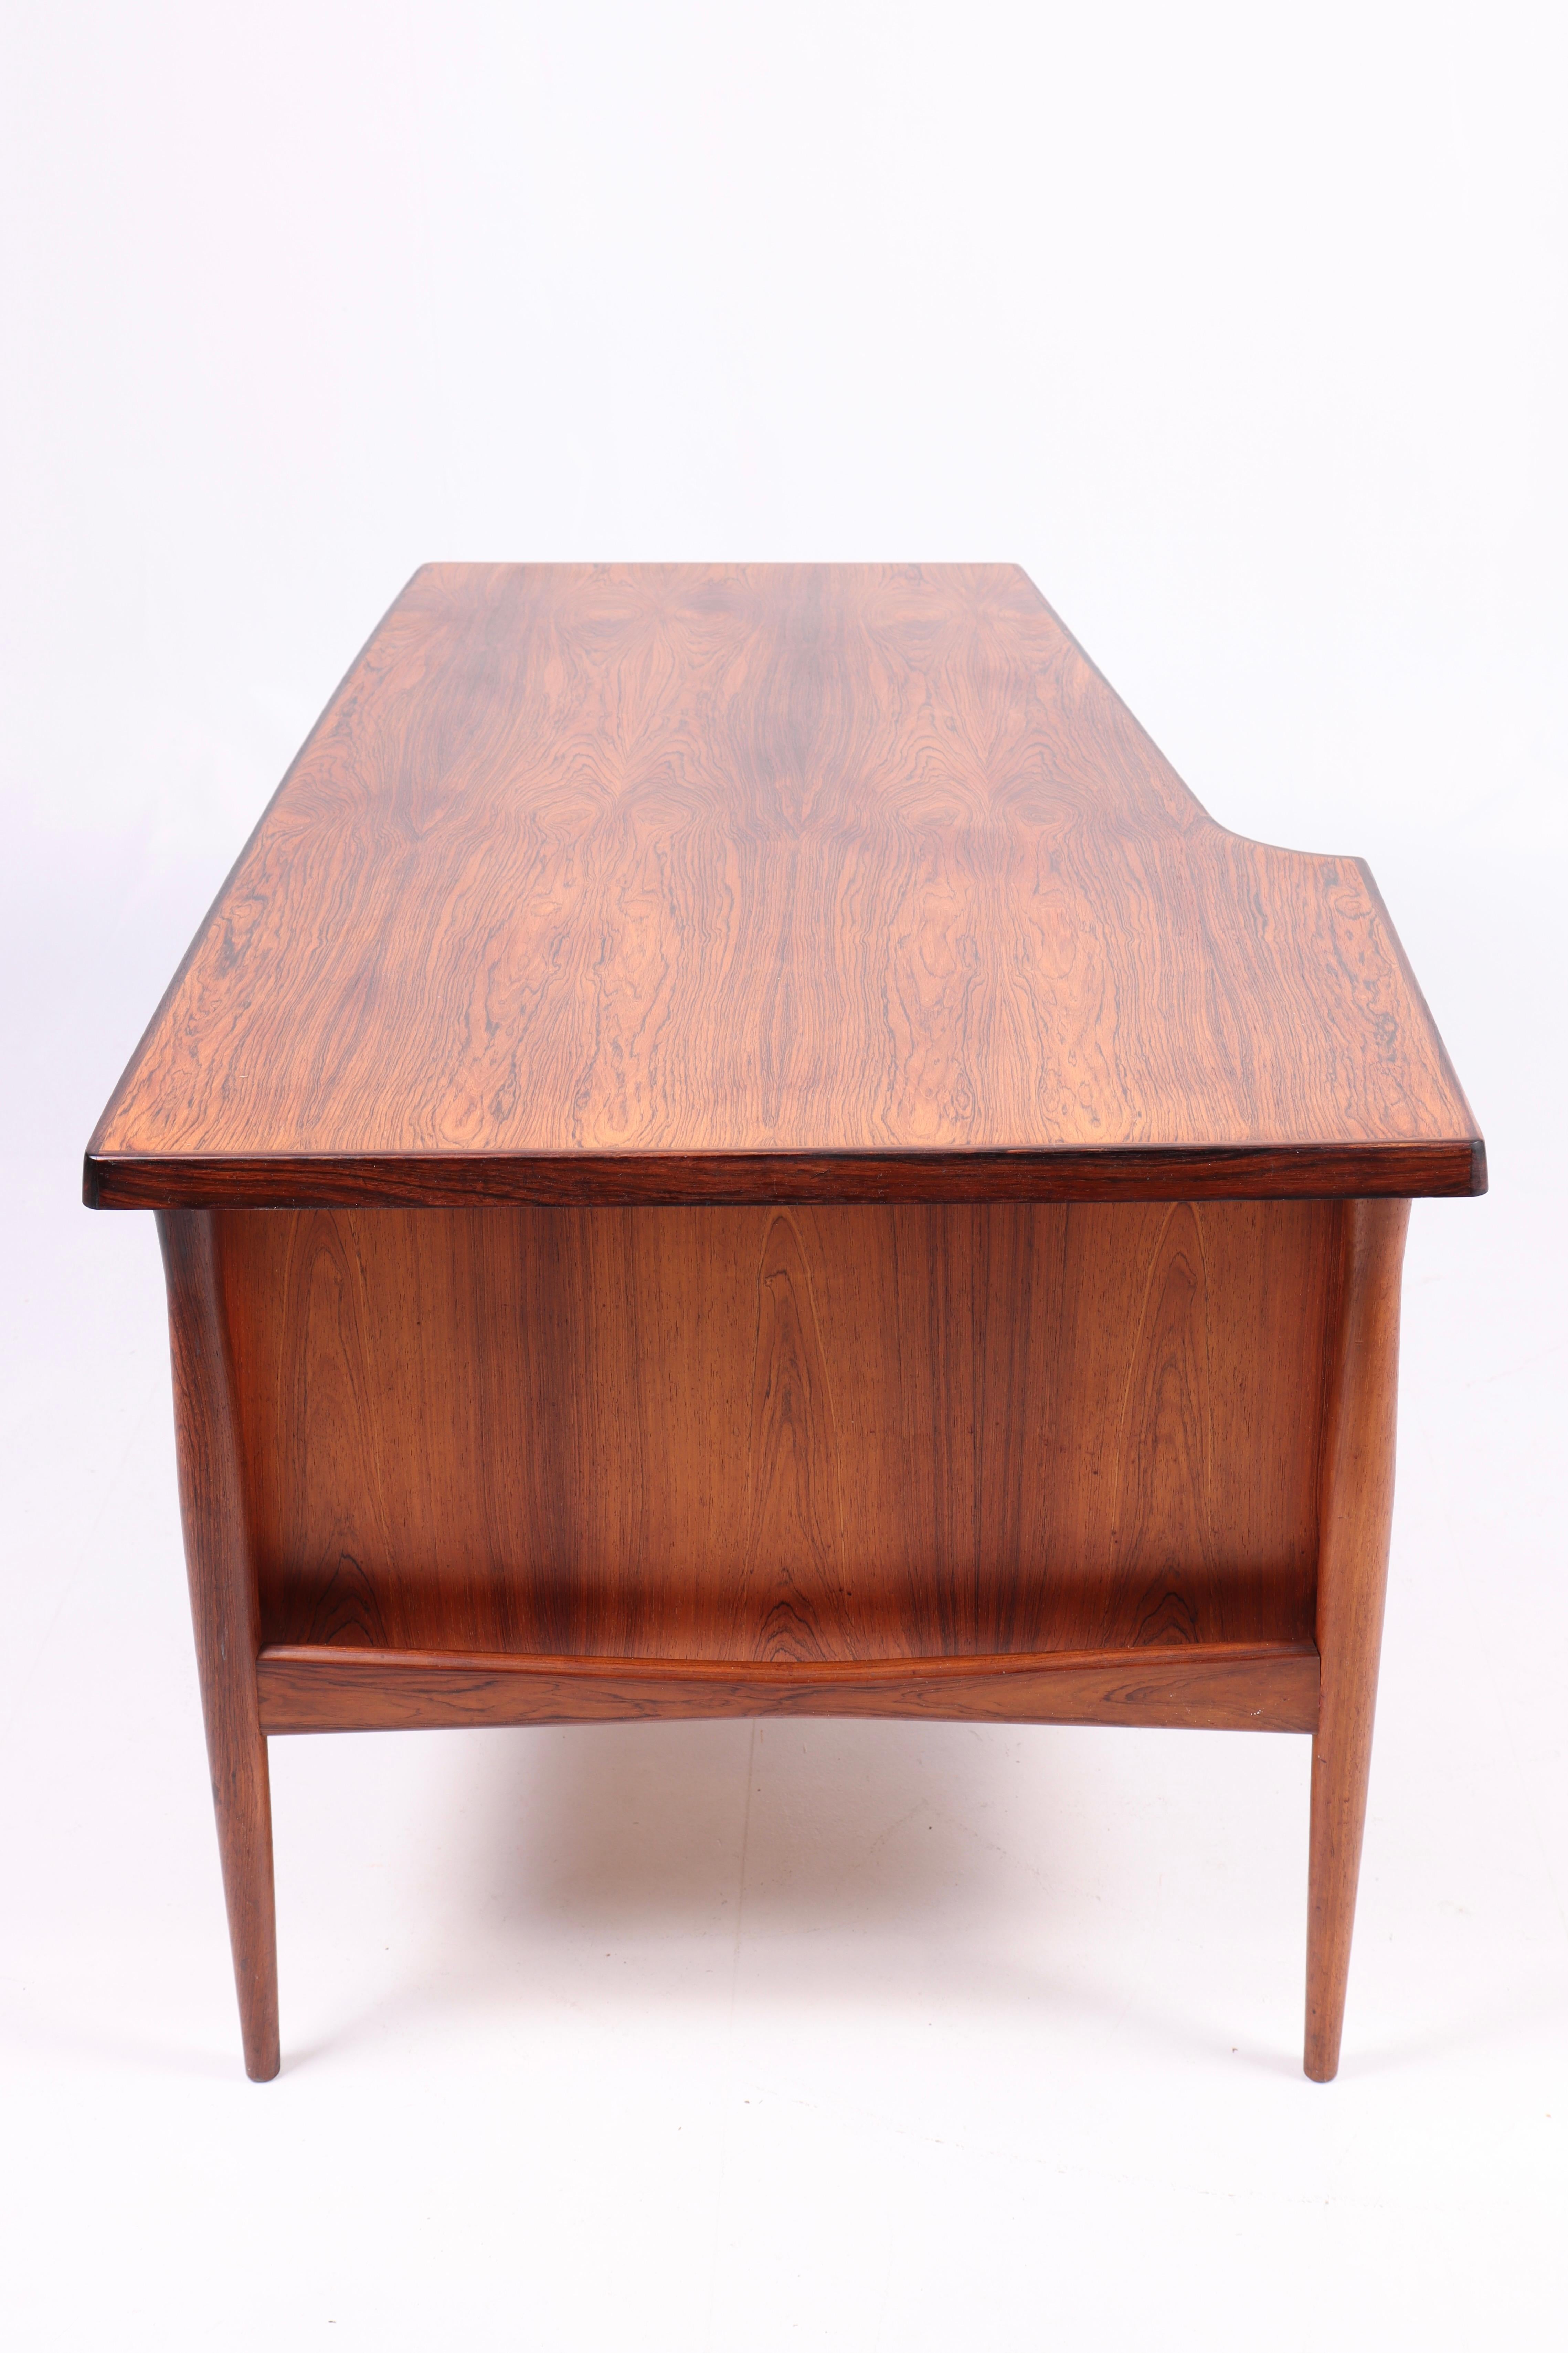 Mid-20th Century Midcentury Desk in Rosewood, Made in Denmark 1960s For Sale